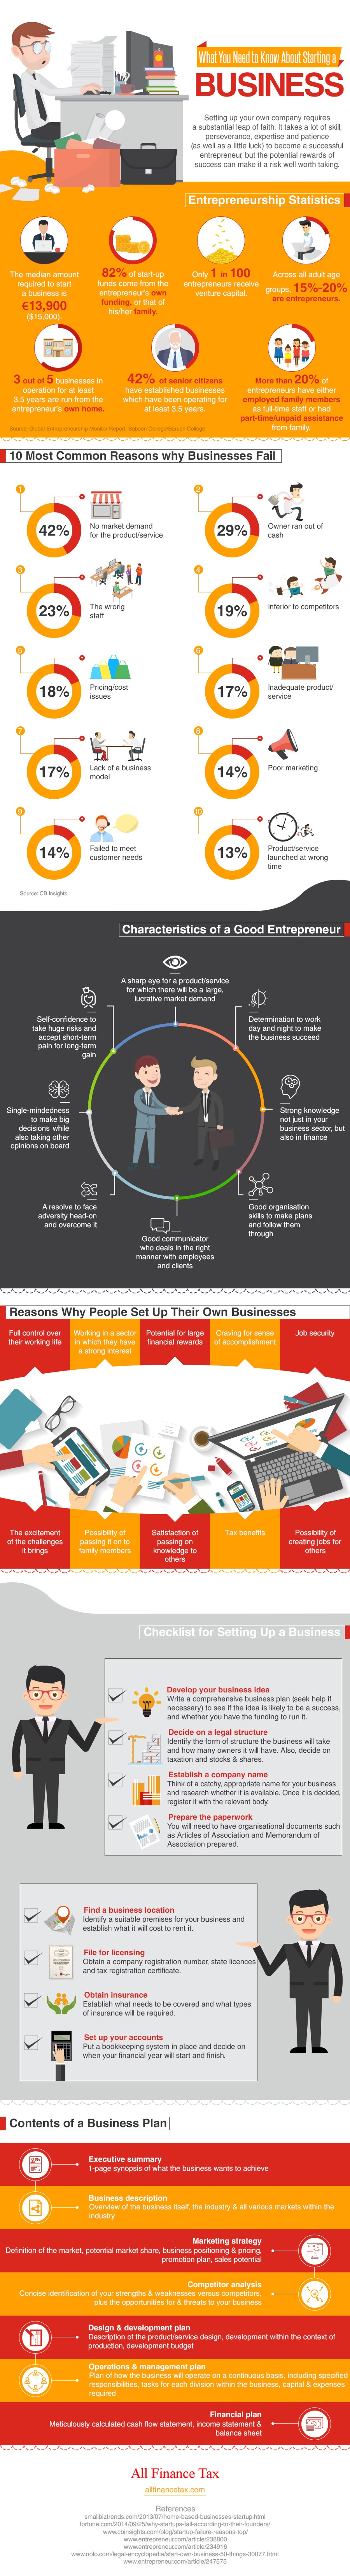 What You Need to Know About Starting a Business #infographic